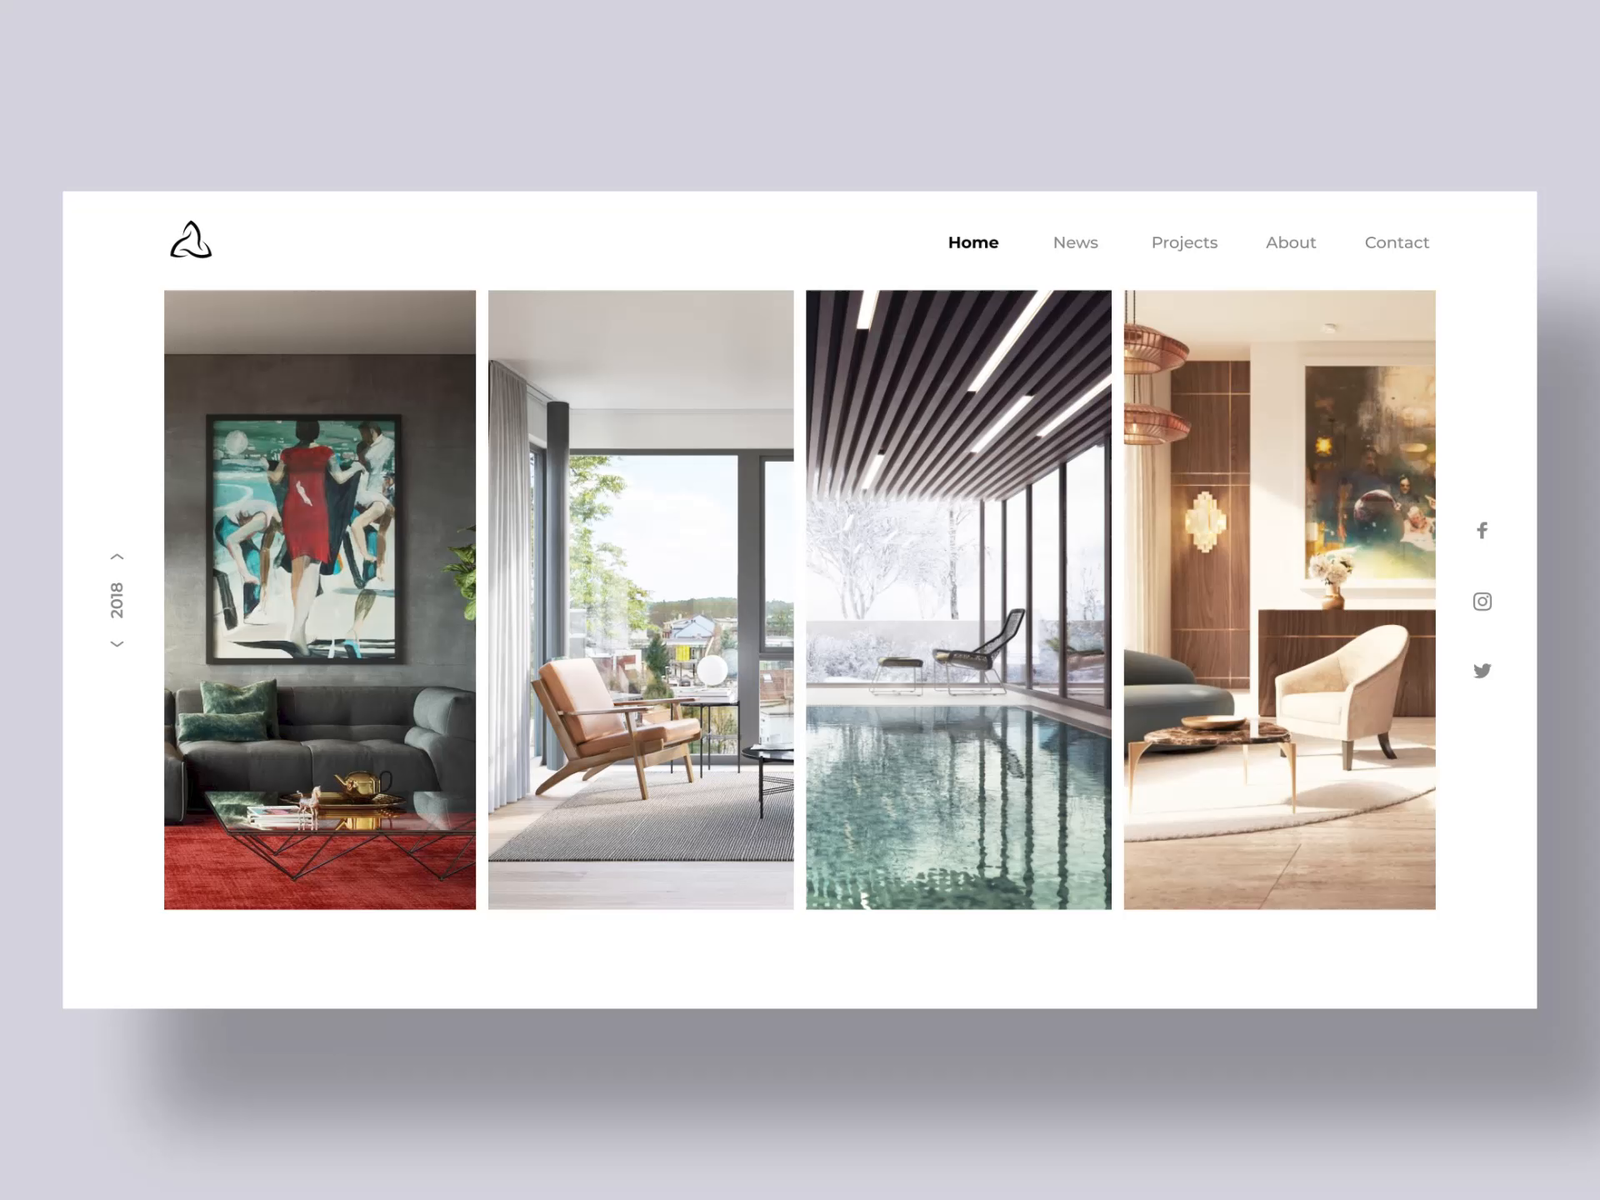 Architecture Firm Landing Page Concept by Guillaume Robert on Dribbble